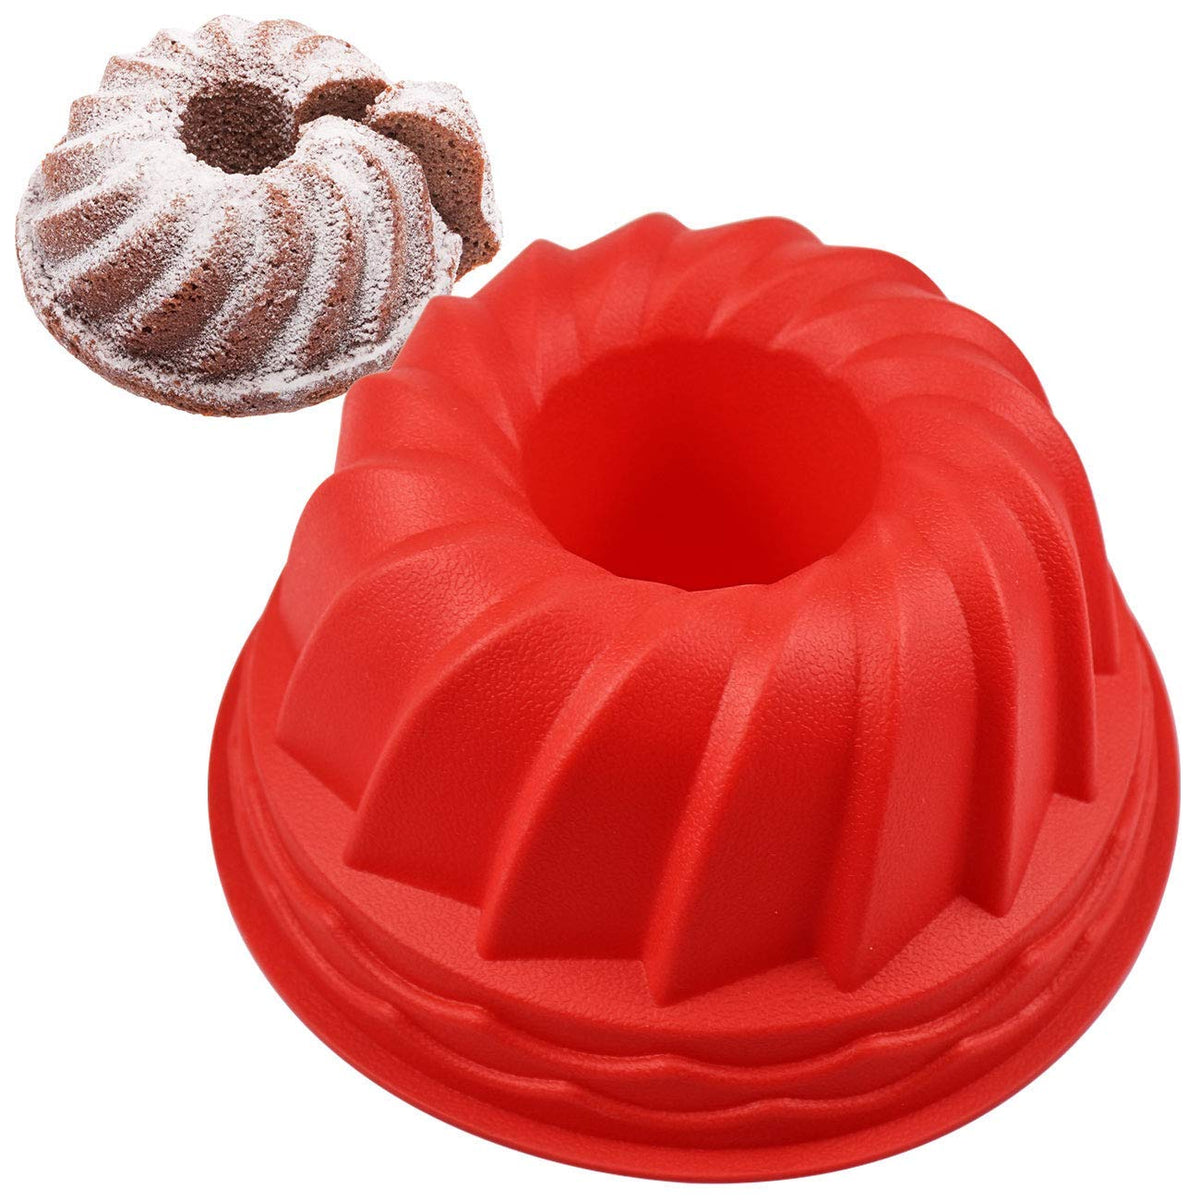 FantasyDay 13'' Happy Birthday Cake Mold Silicone Baking Molds Party Cake  Bakeware for Your Birthday Dessert, Cake, Bread, Tart, Pie, Flan and More #7